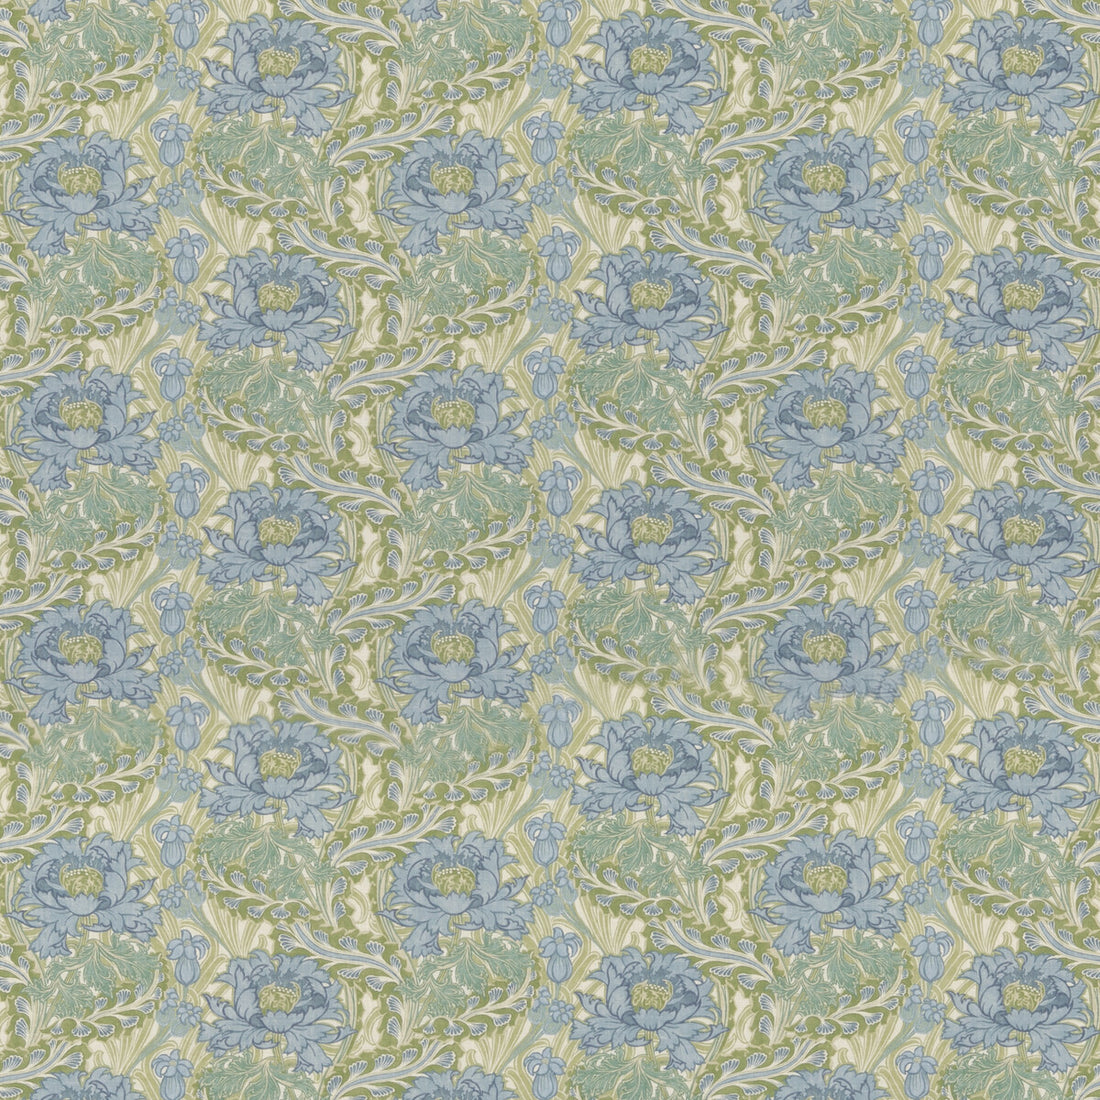 Little Brantwood fabric in blue/green color - pattern BP10983.1.0 - by G P &amp; J Baker in the Original Brantwood Fabric collection